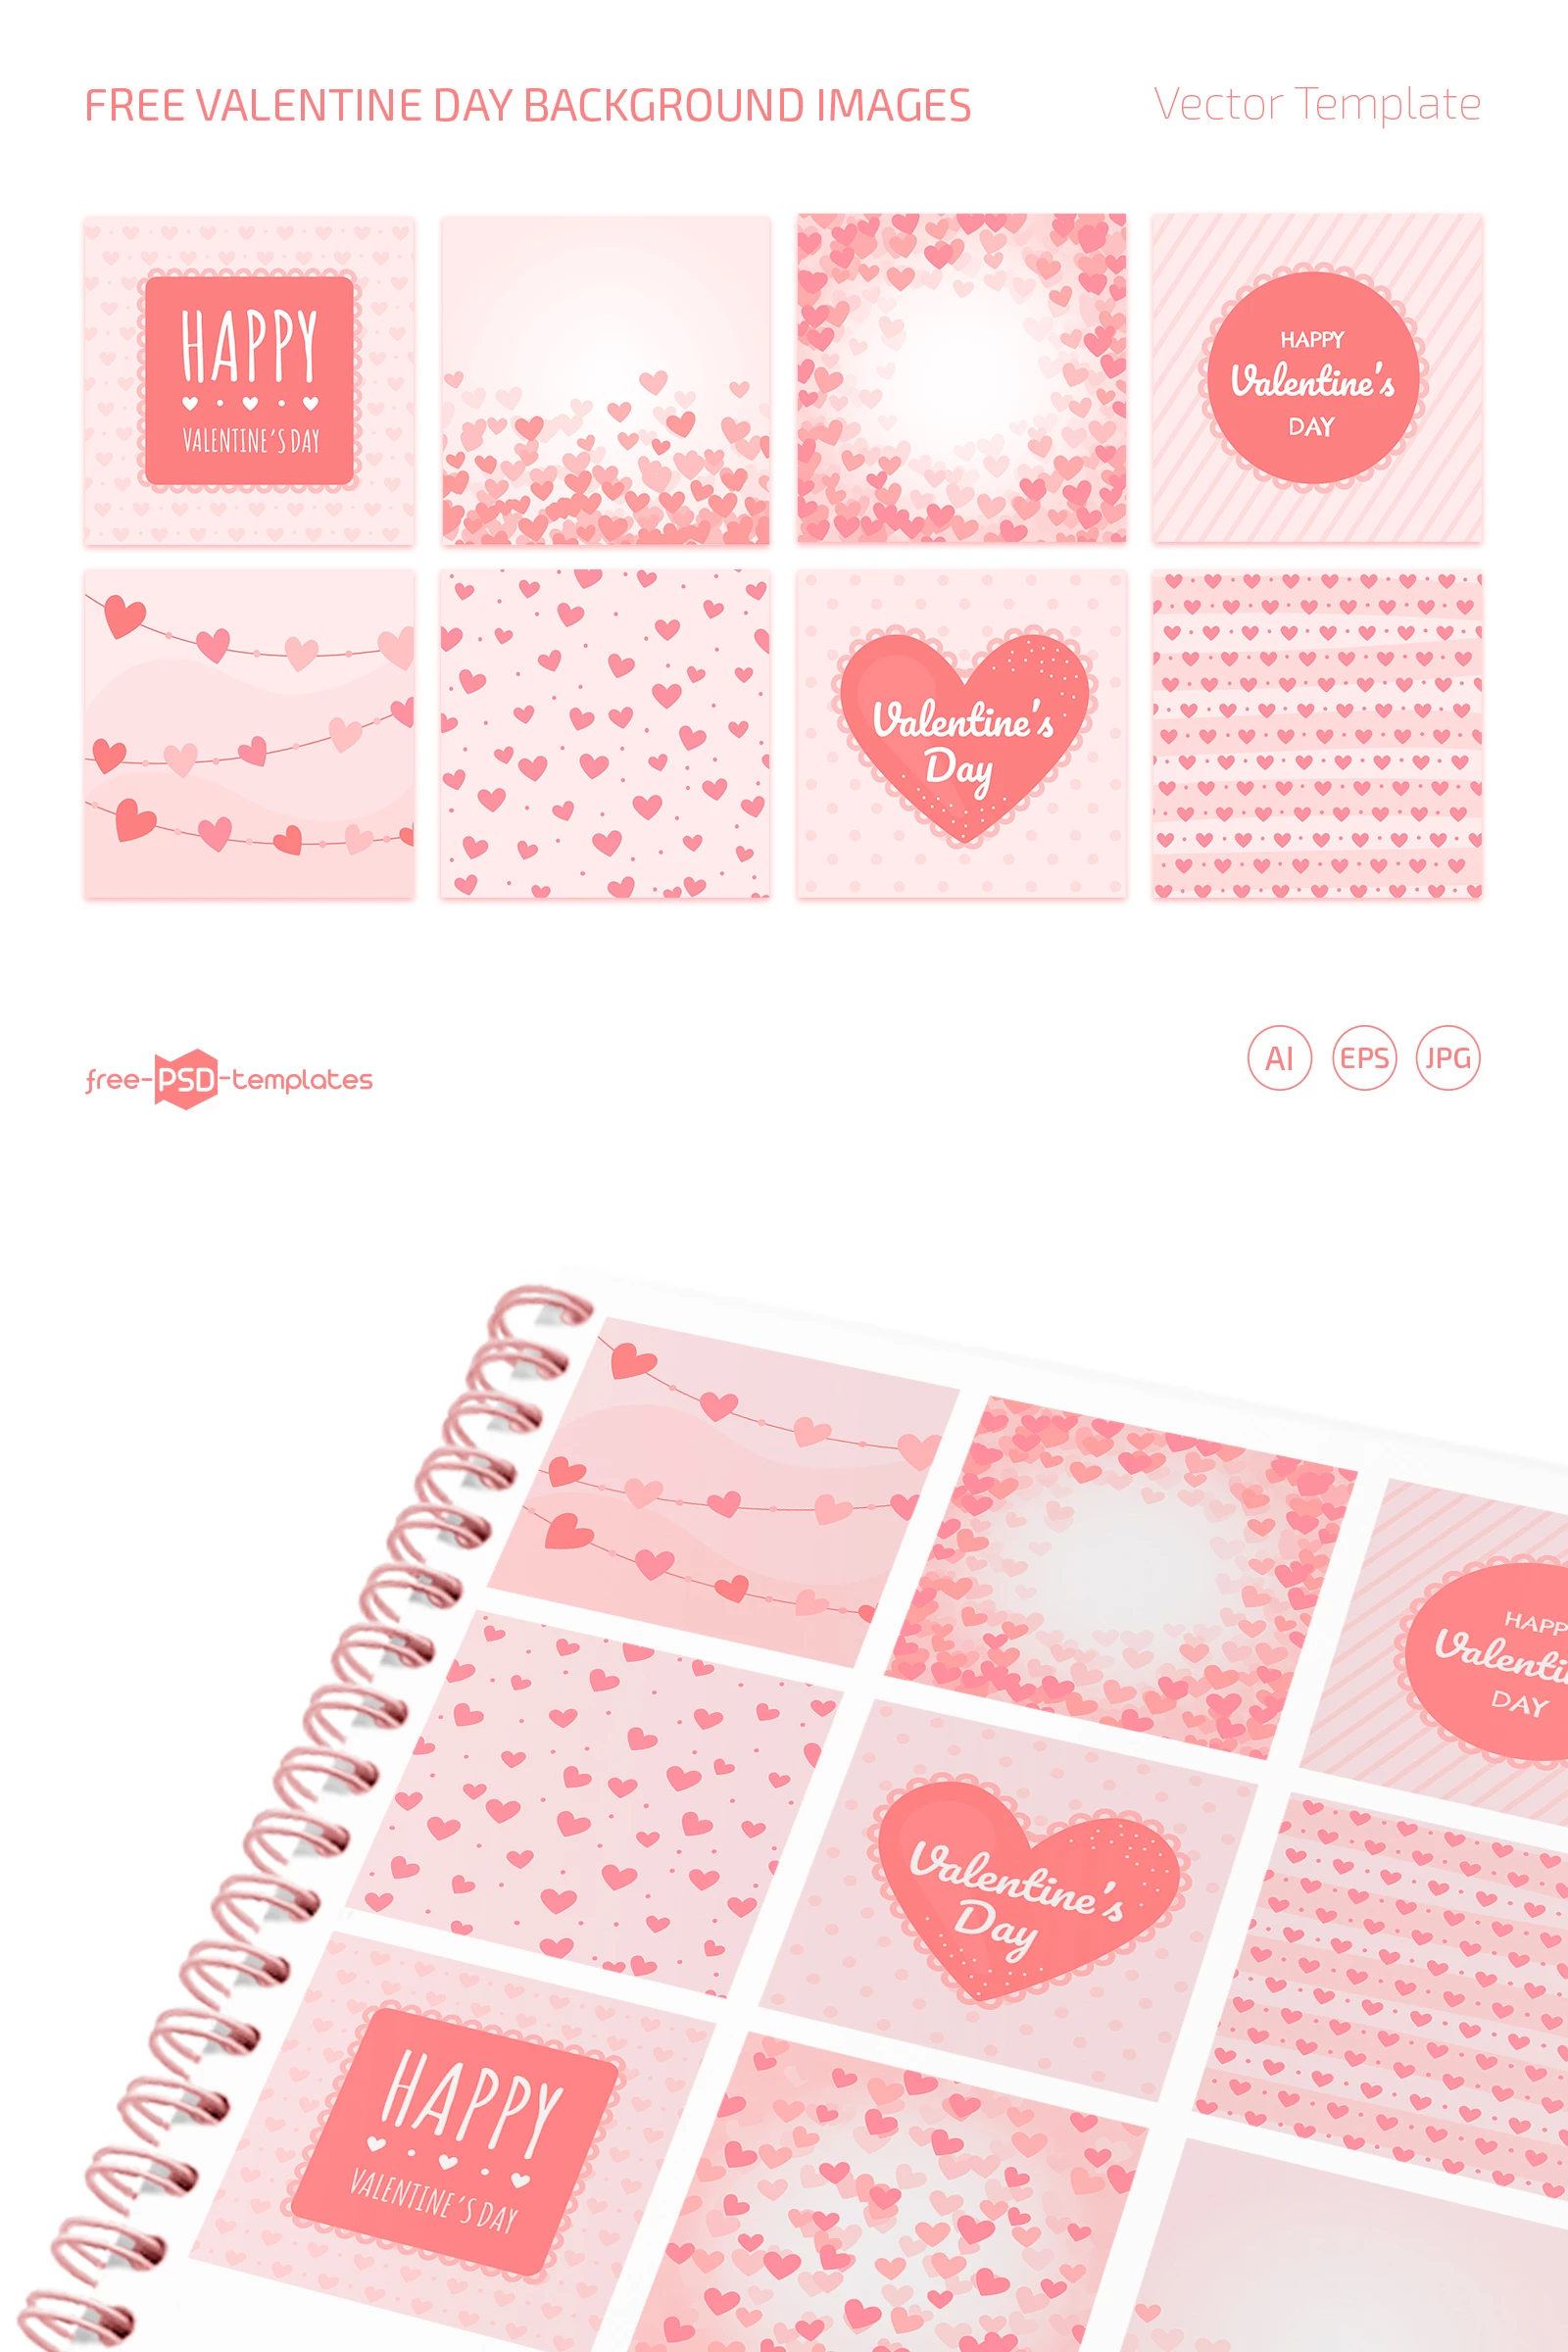 Free Valentine Day Background Images